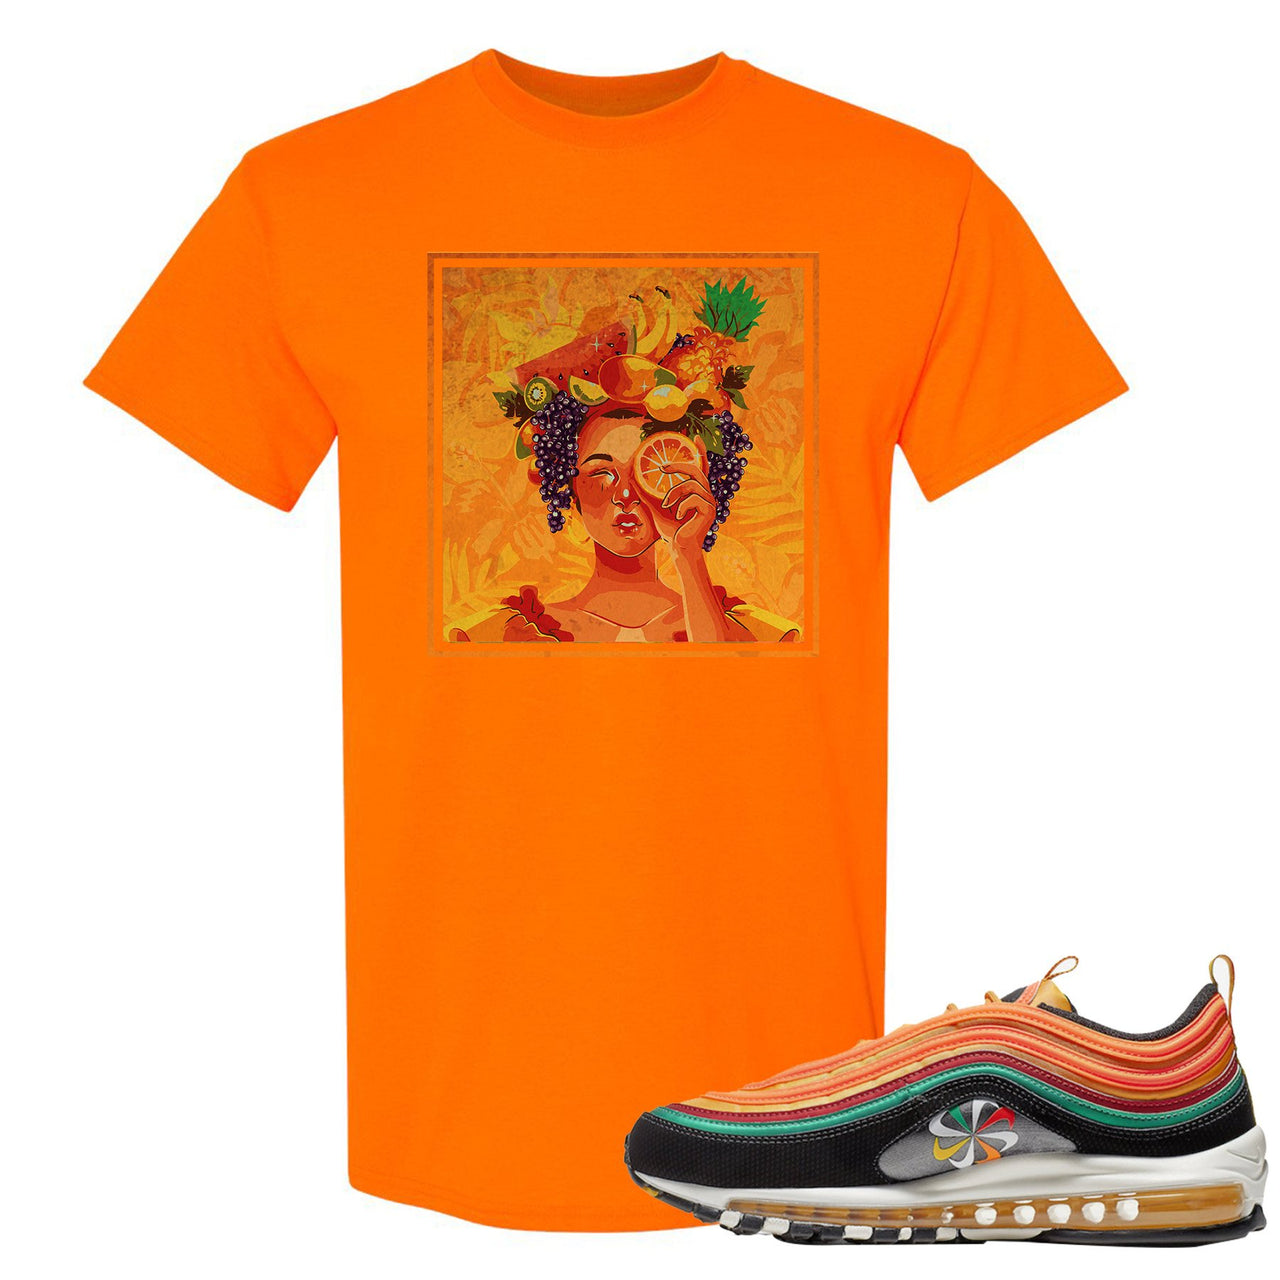 Printed on the front of the Air Max 97 Sunburst safety orange sneaker matching t-shirt is the Lady Fruit logo